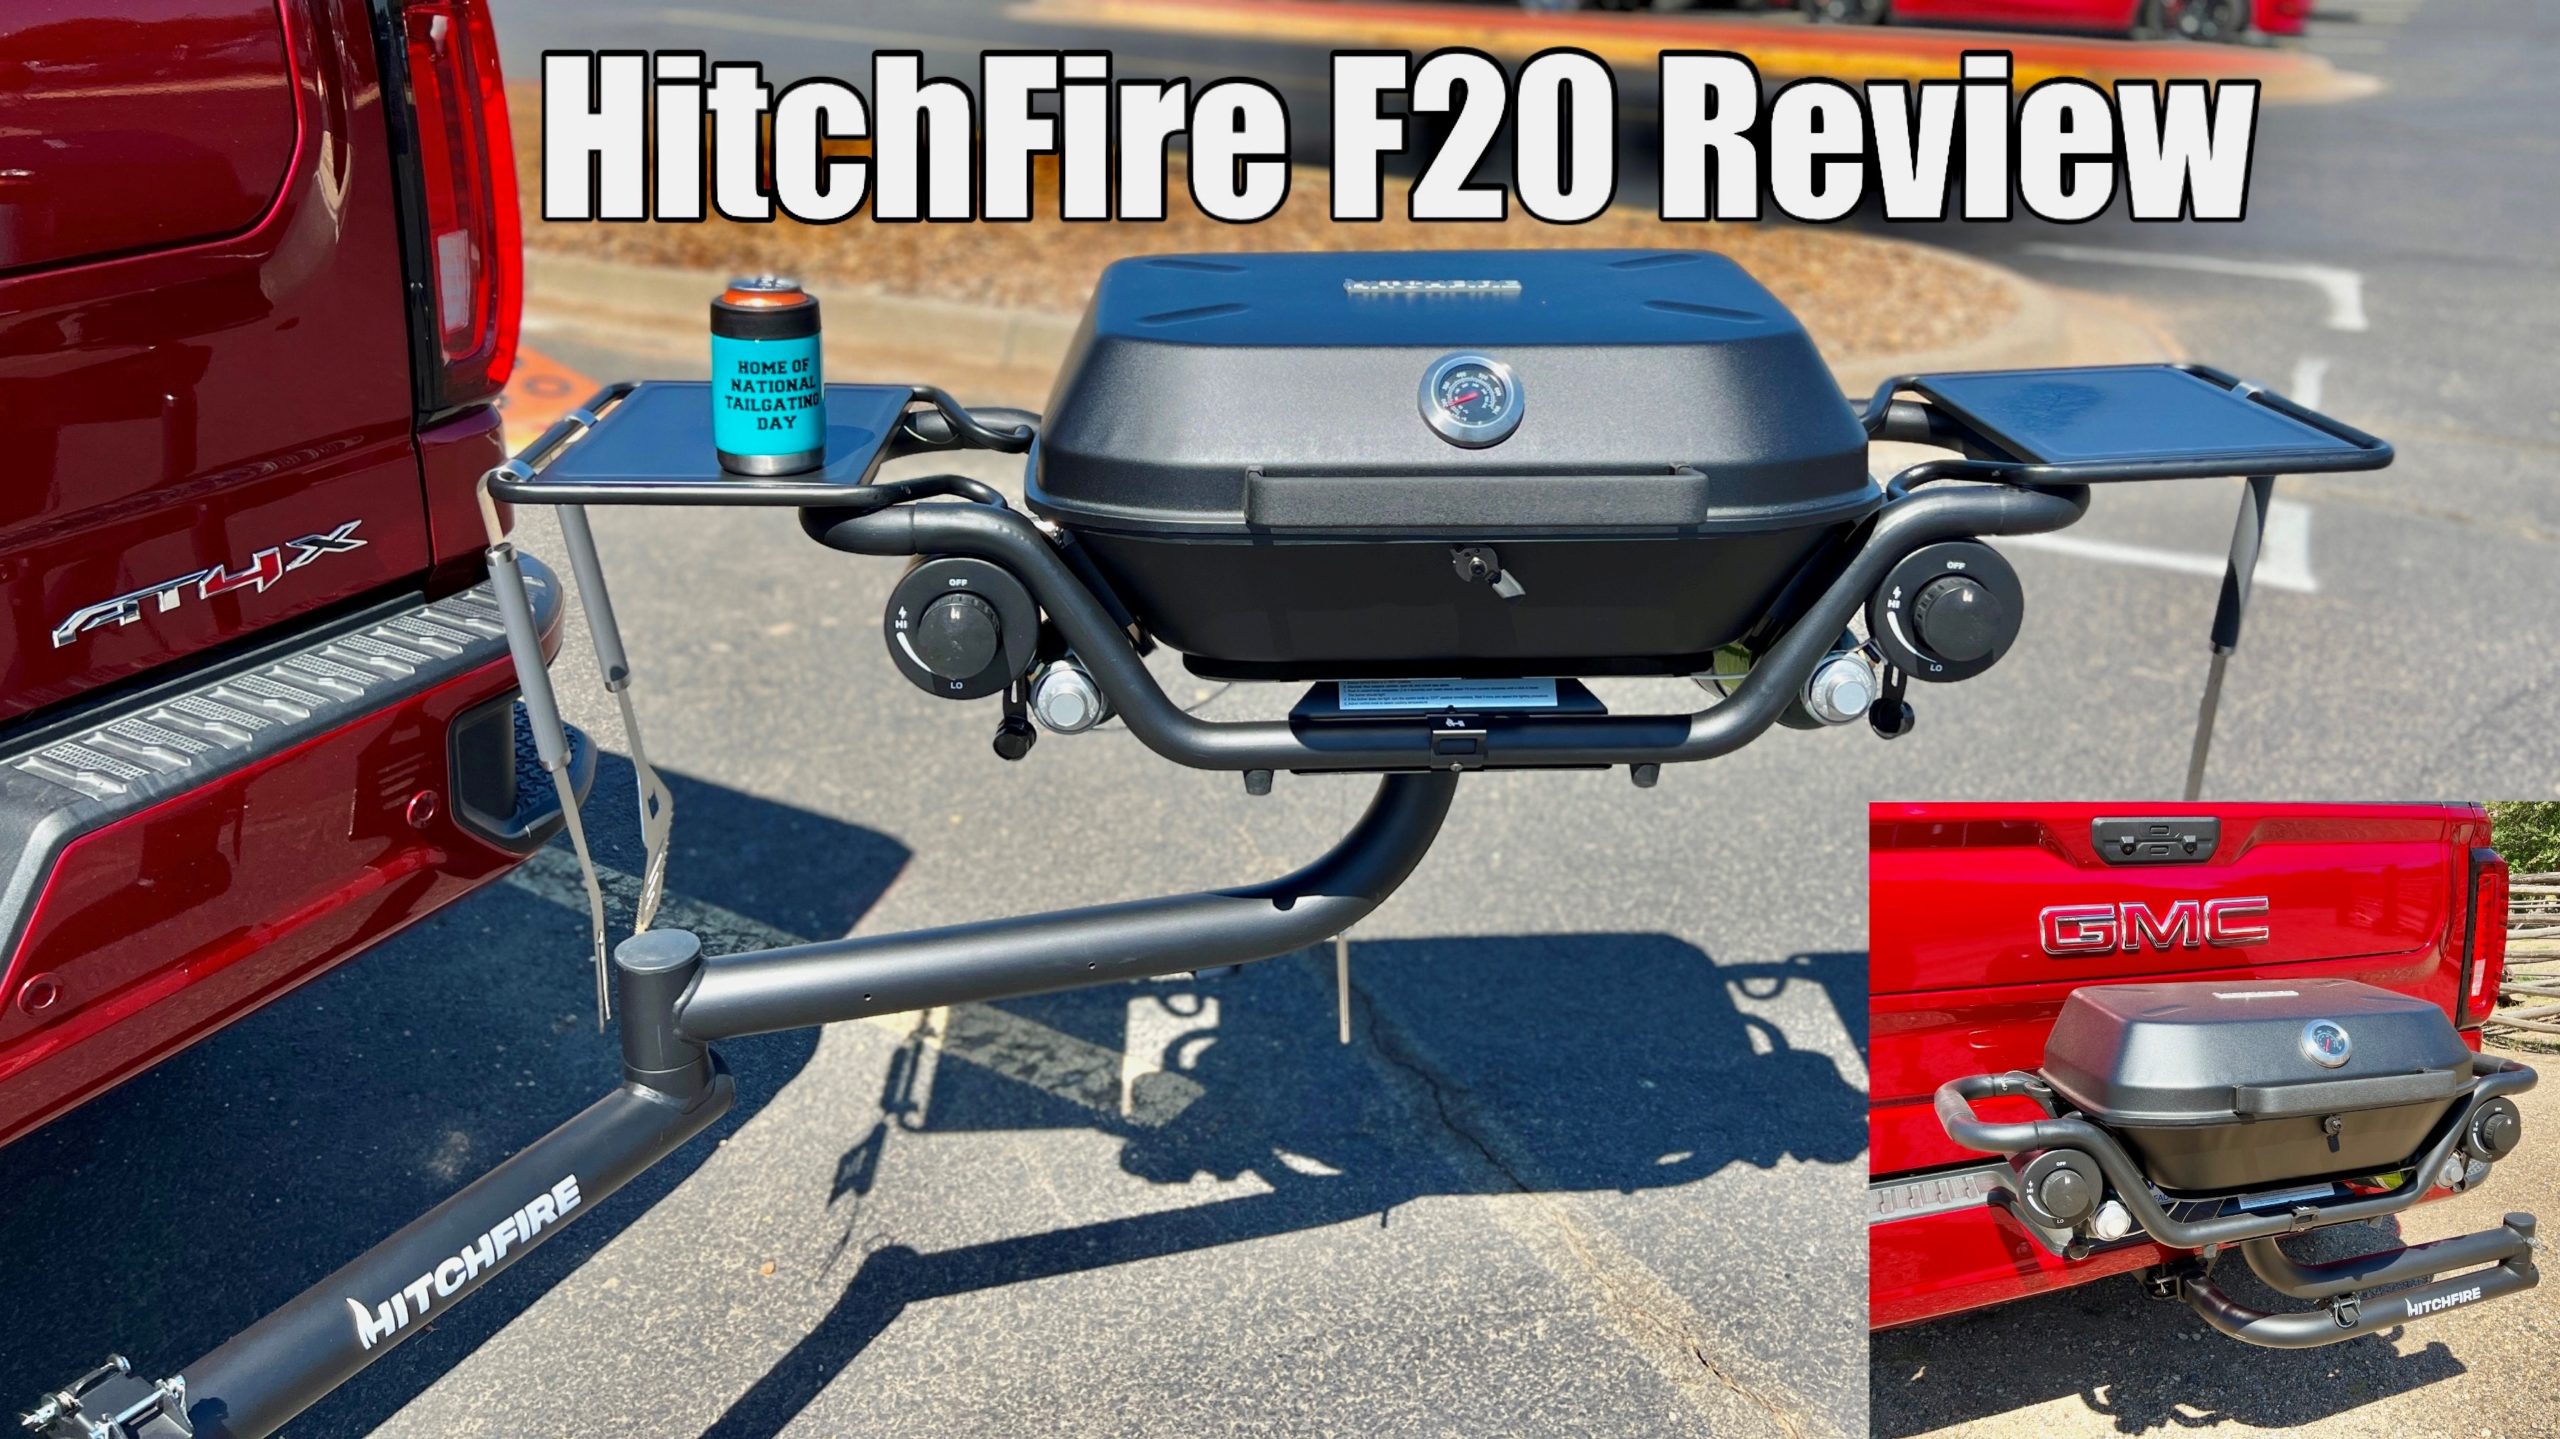 https://tailgating-challenge.com/wp-content/uploads/2022/09/hitchfire-f20-review-scaled.jpg